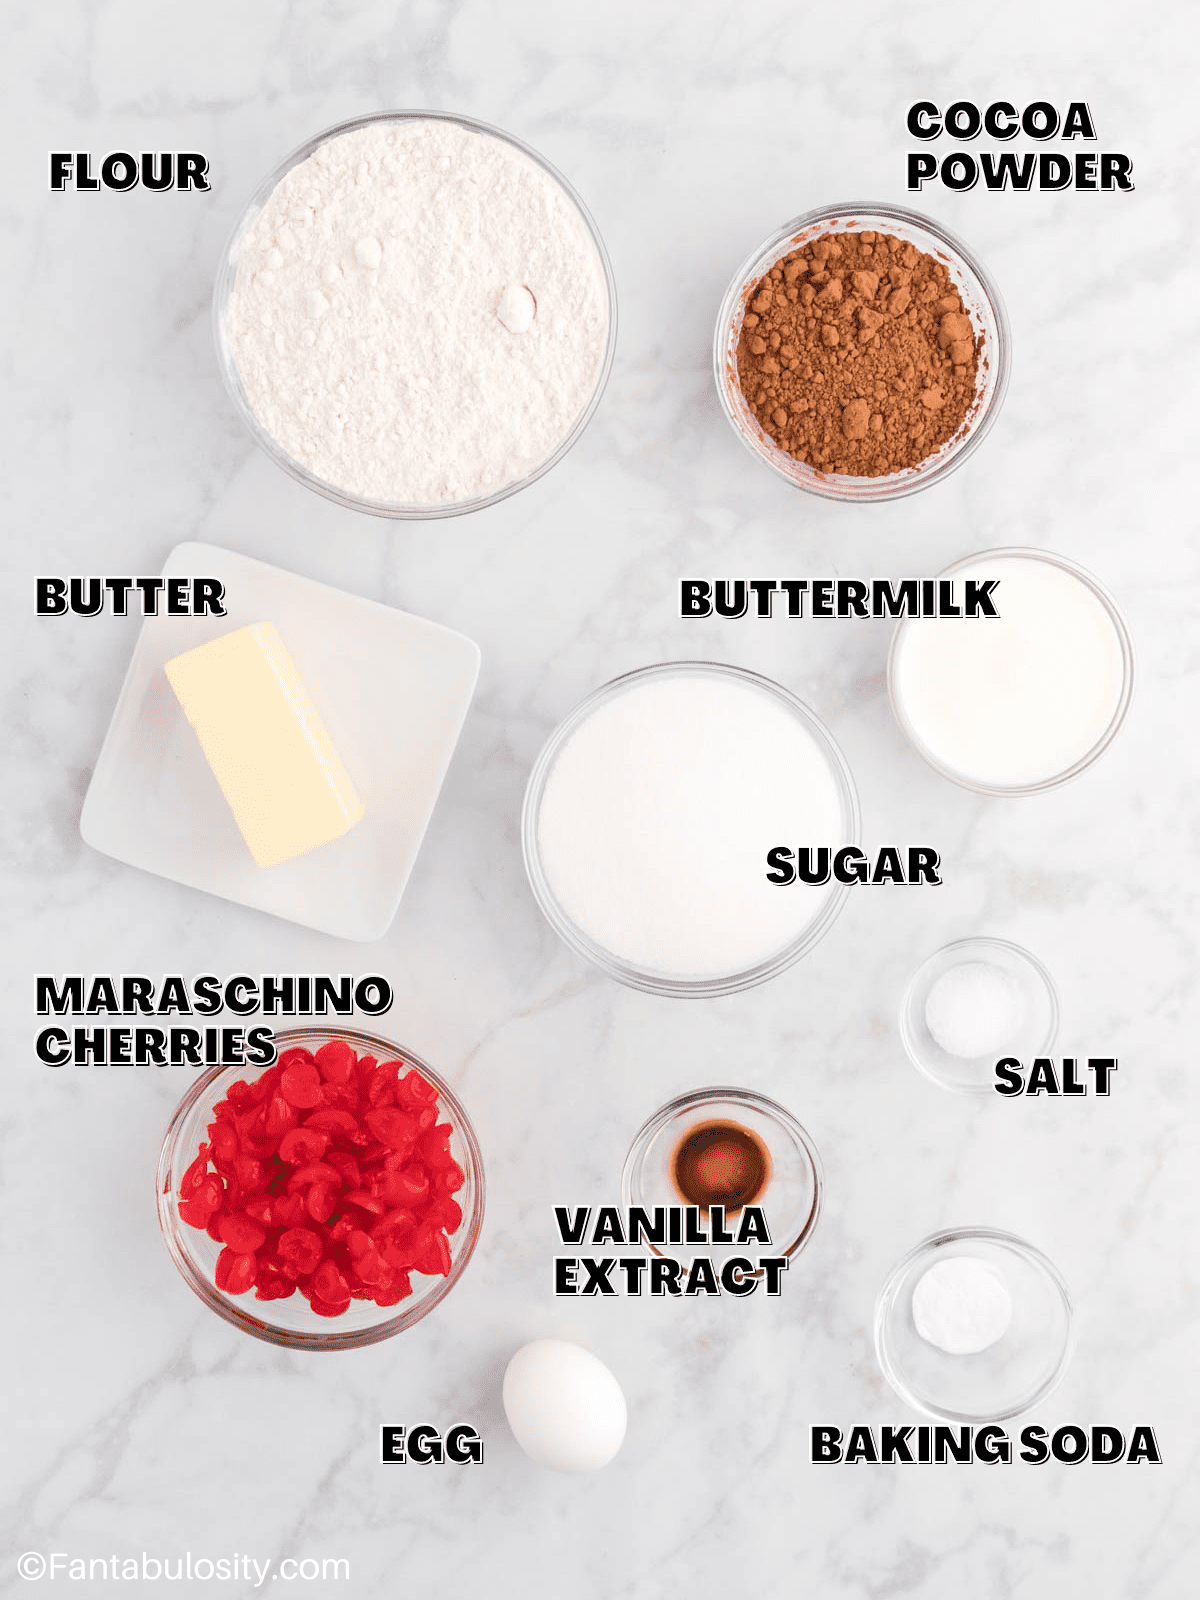 Ingredients for chocolate cherry cookies laid out on a counter with labels on the image.